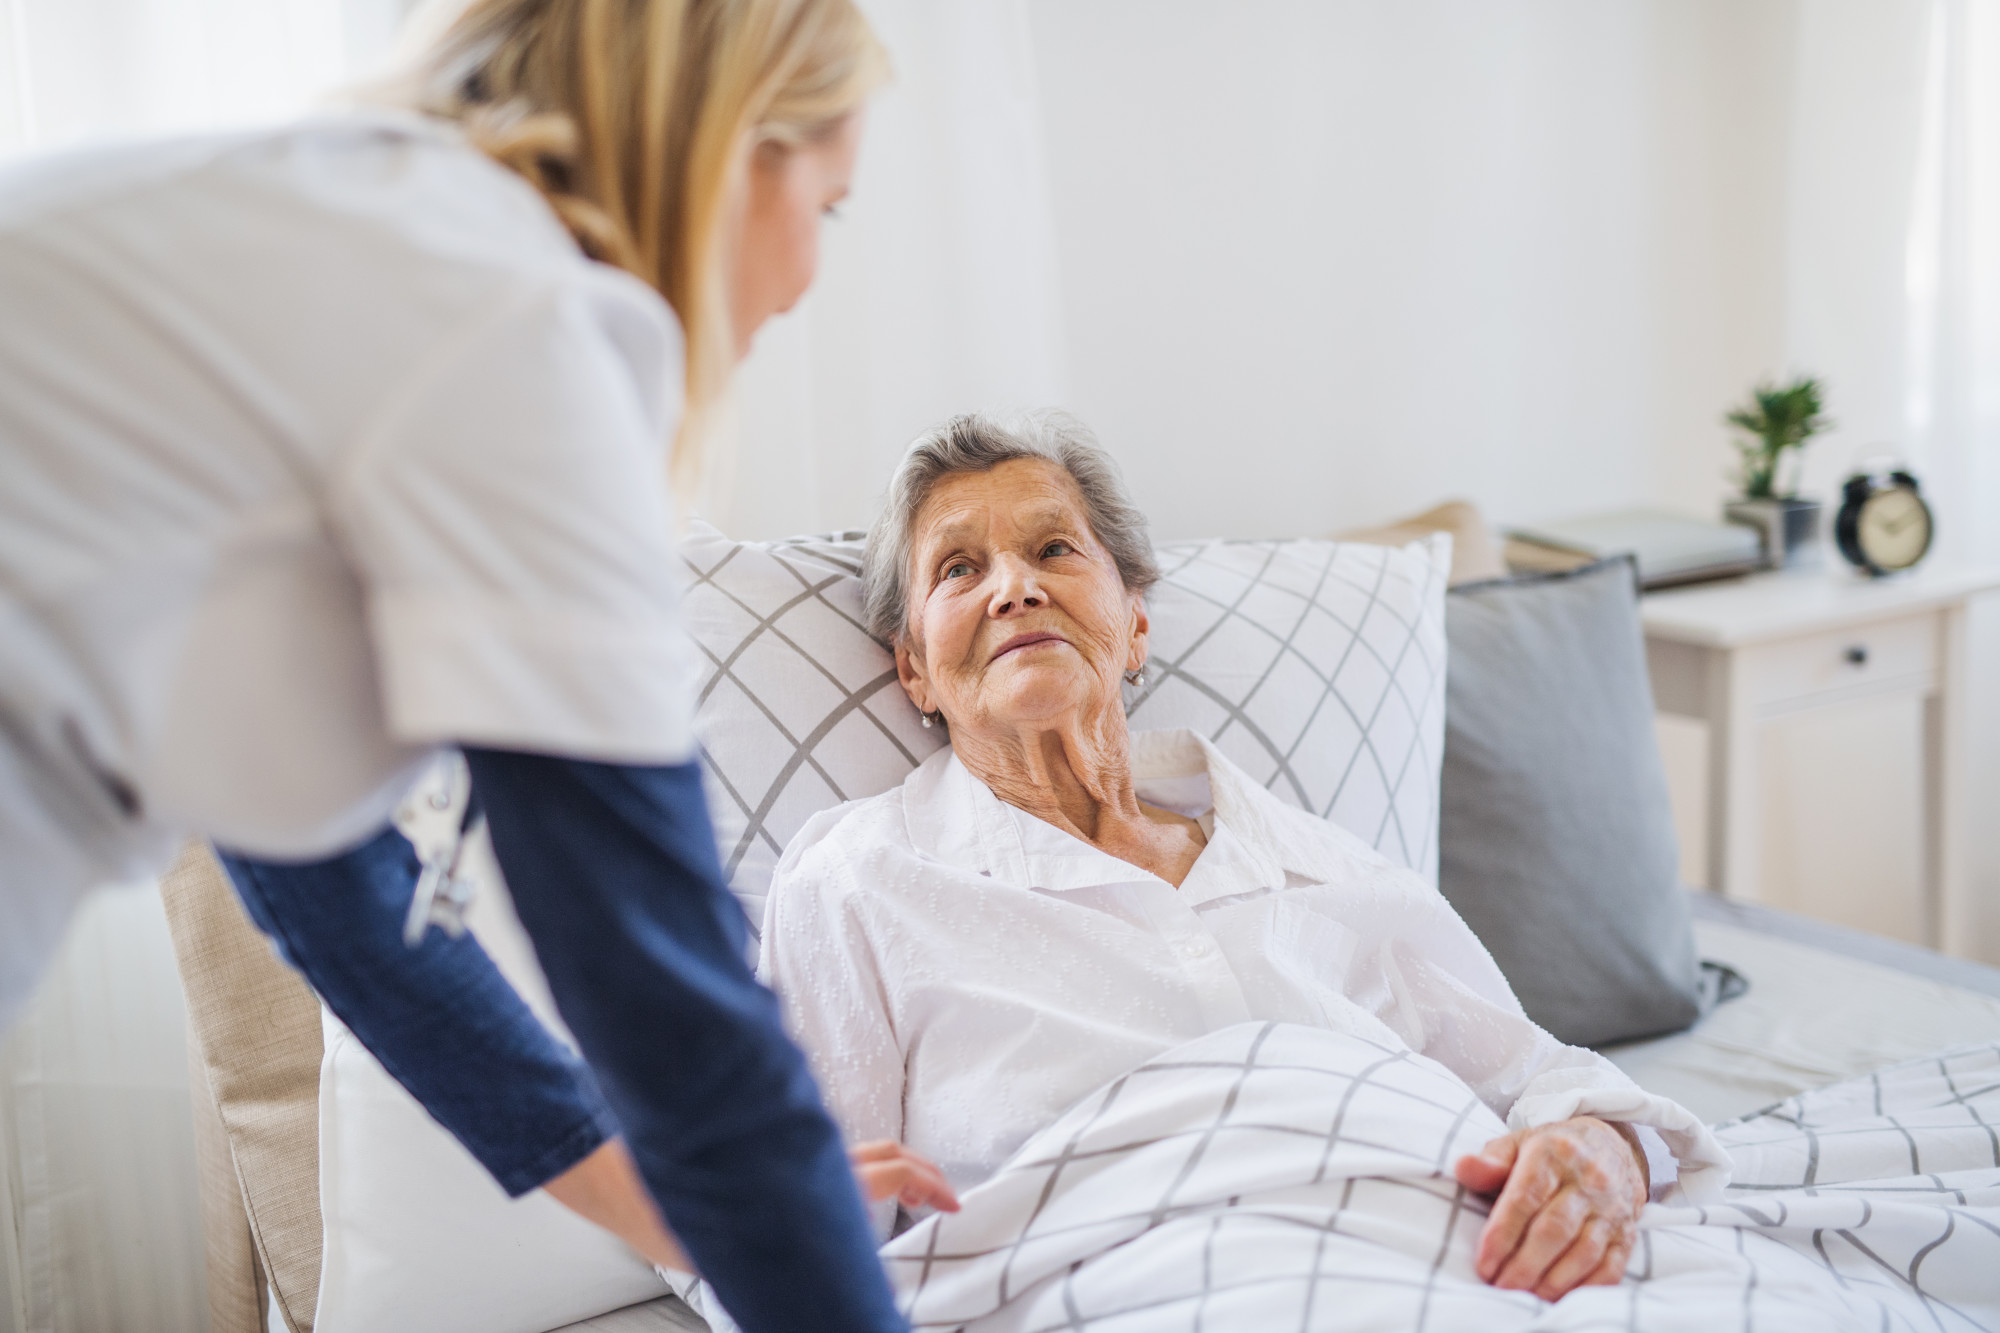 5 Benefits of Inpatient Hospice Care over Home Care